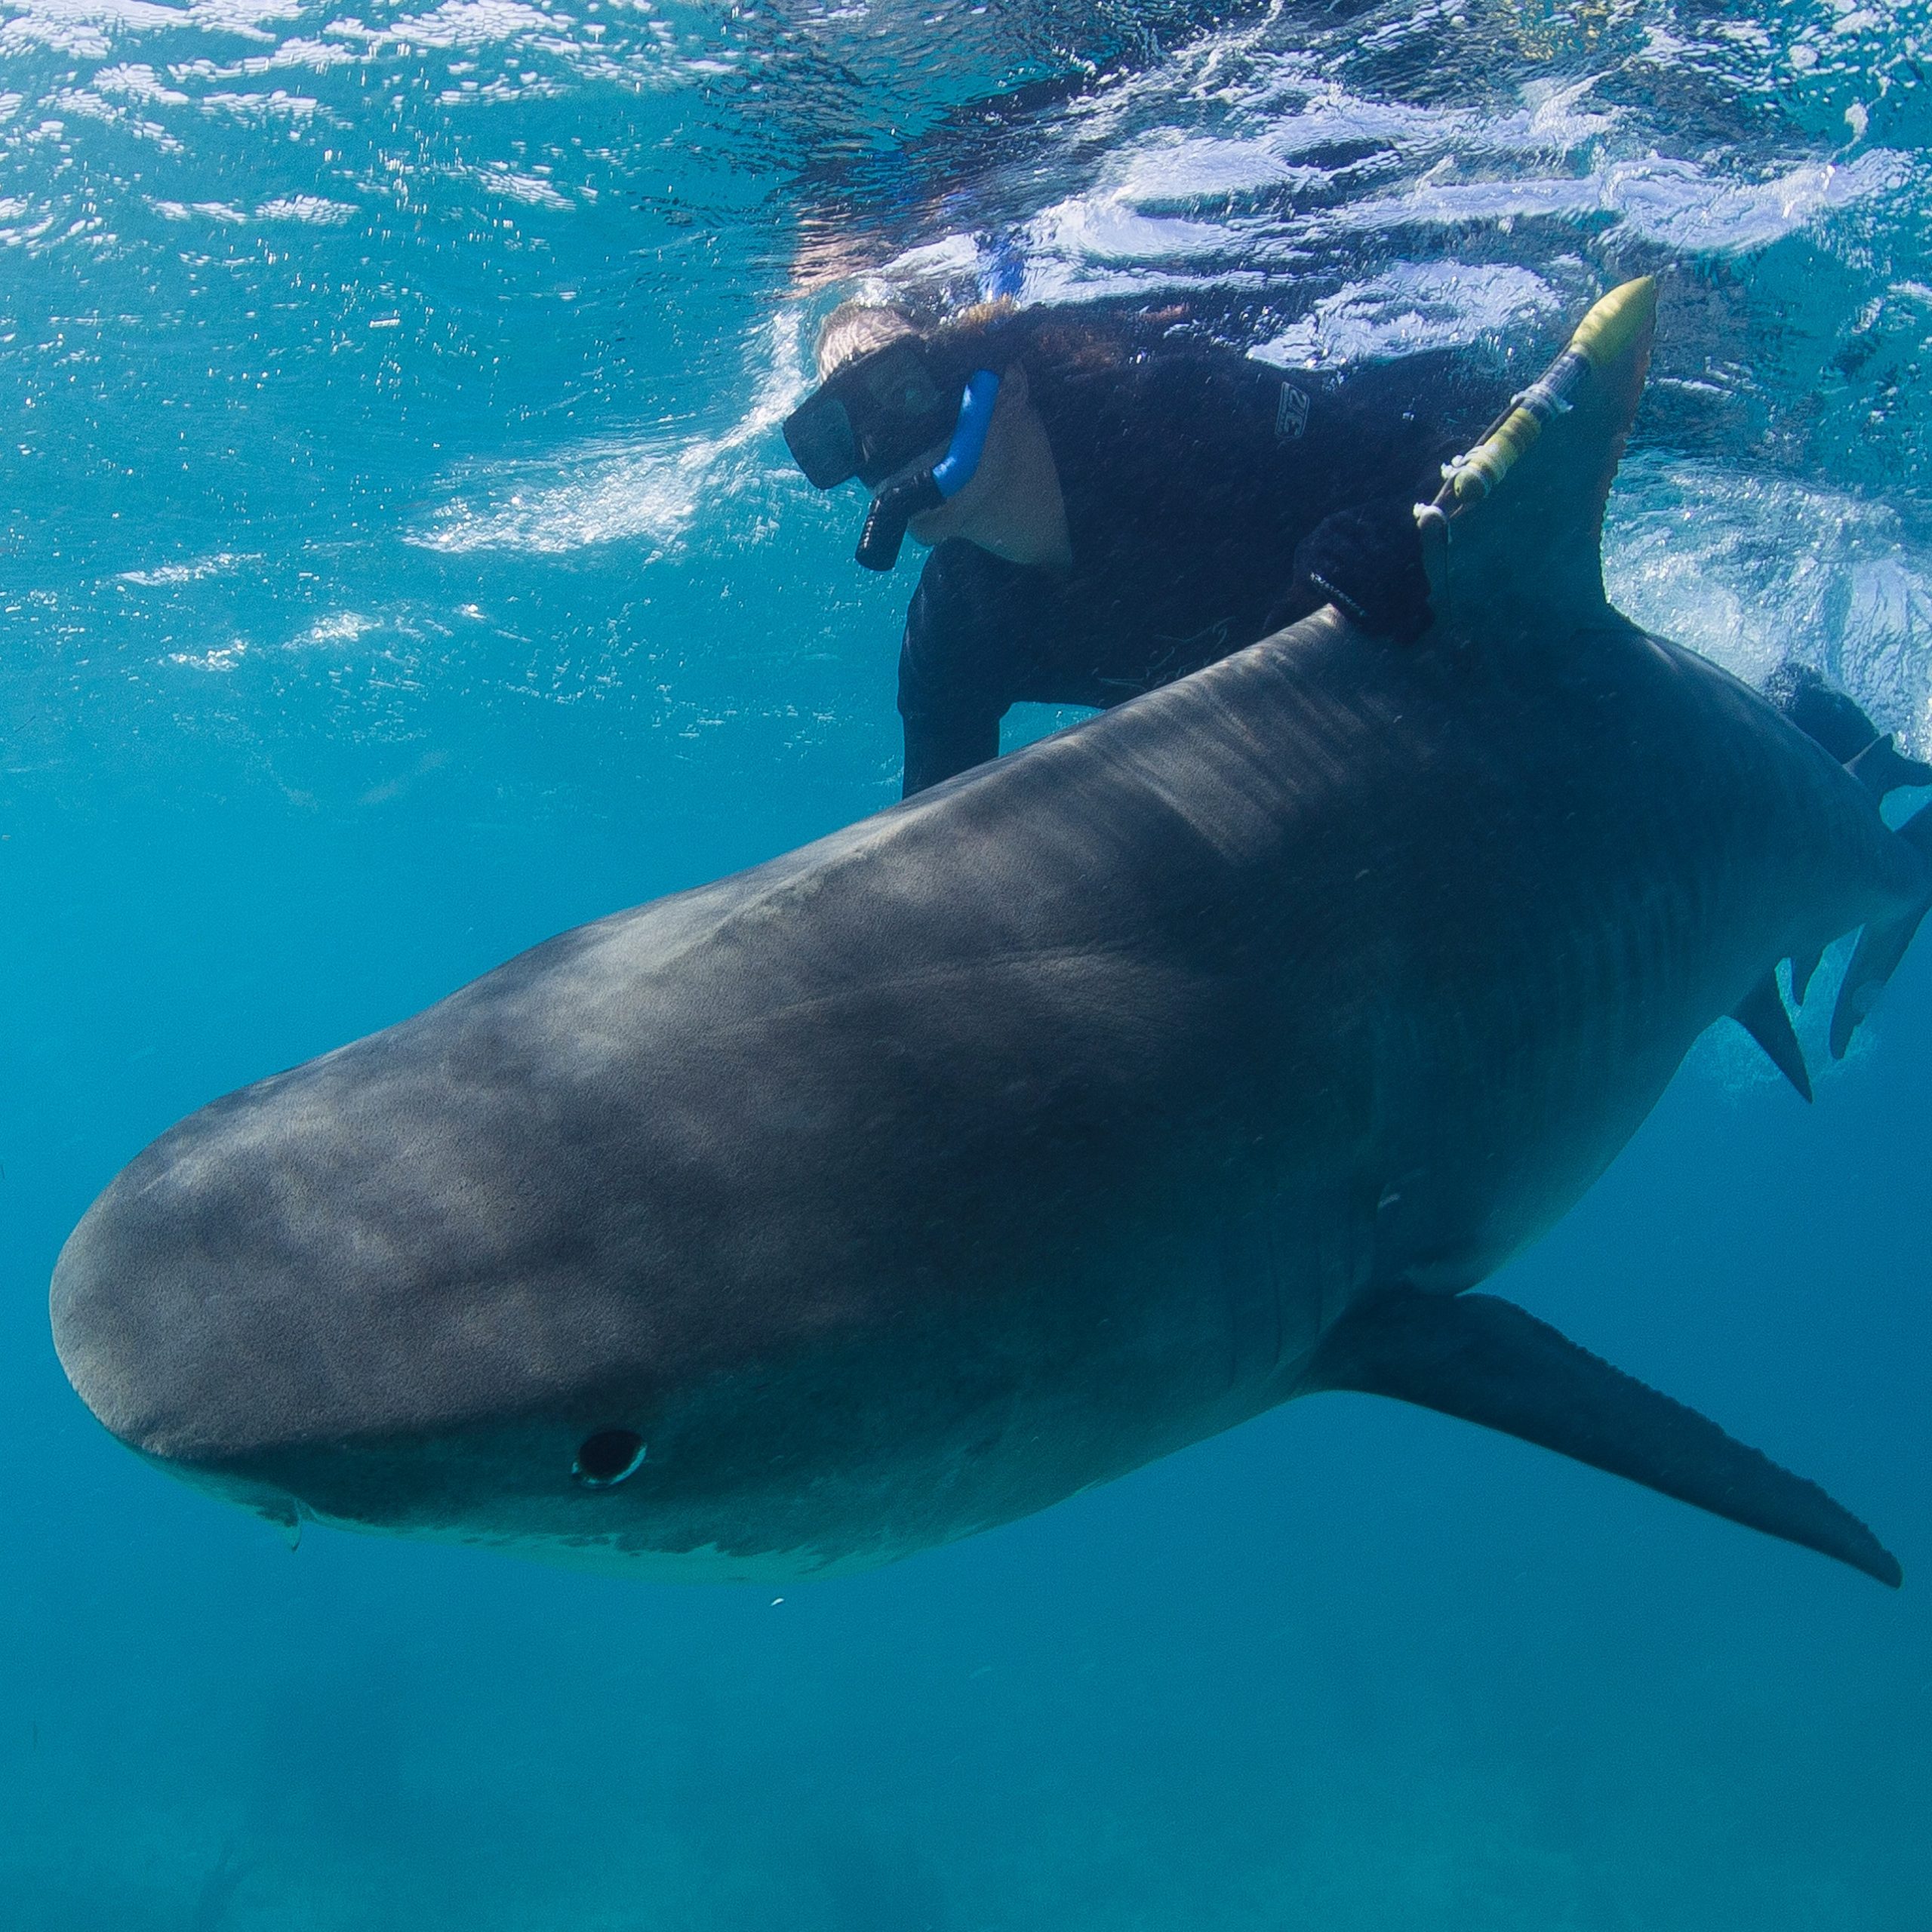 Following sampling and tagging, I carefully escort a satellite tagged tiger shark back into the ocean. PC: Jim Abernethy